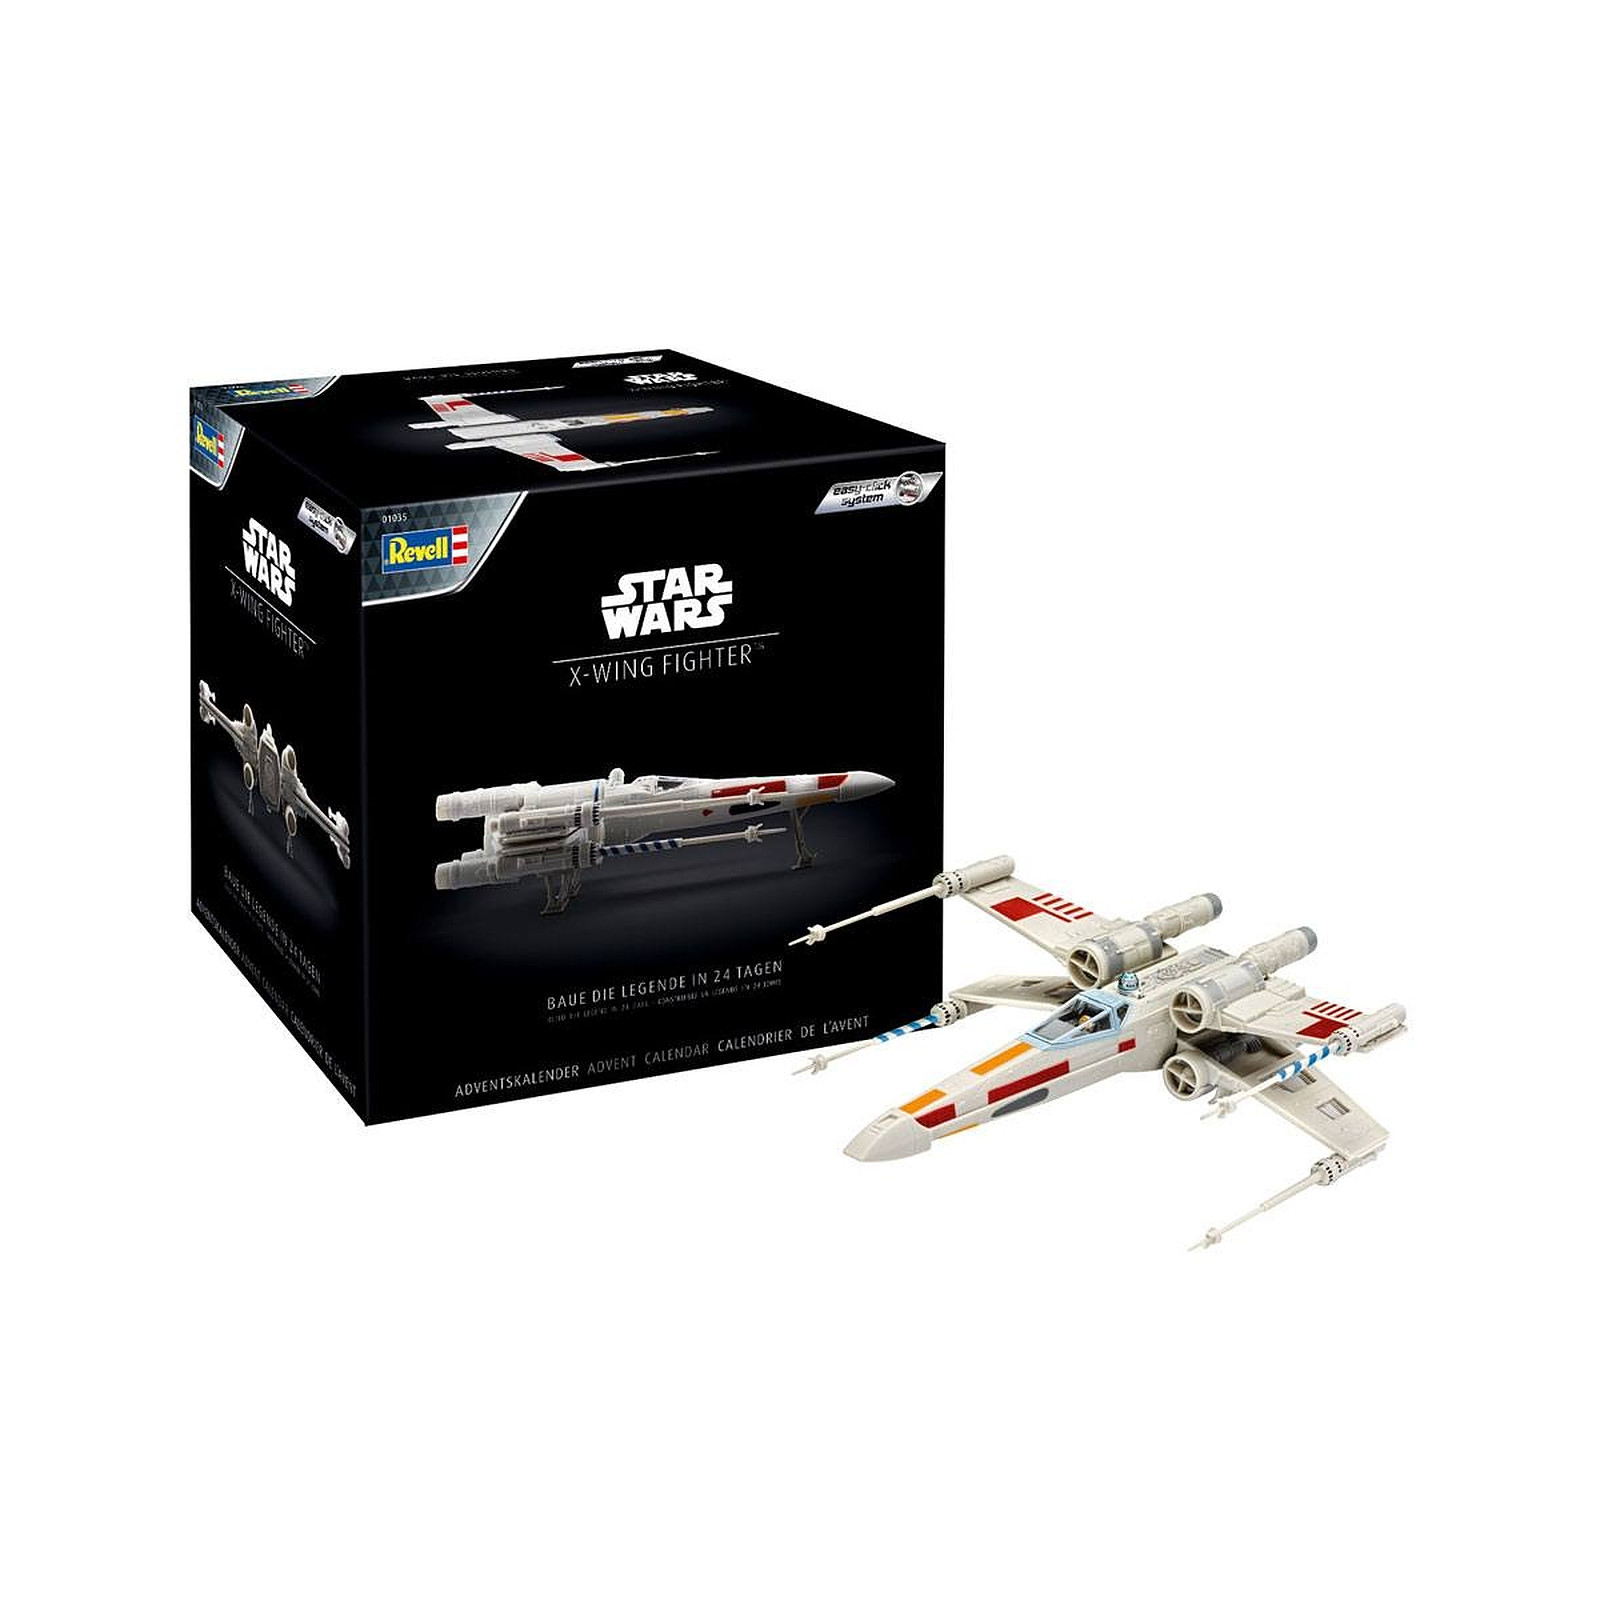 Star Wars - Calendrier de l'avent X-Wing Fighter - Figurines Revell